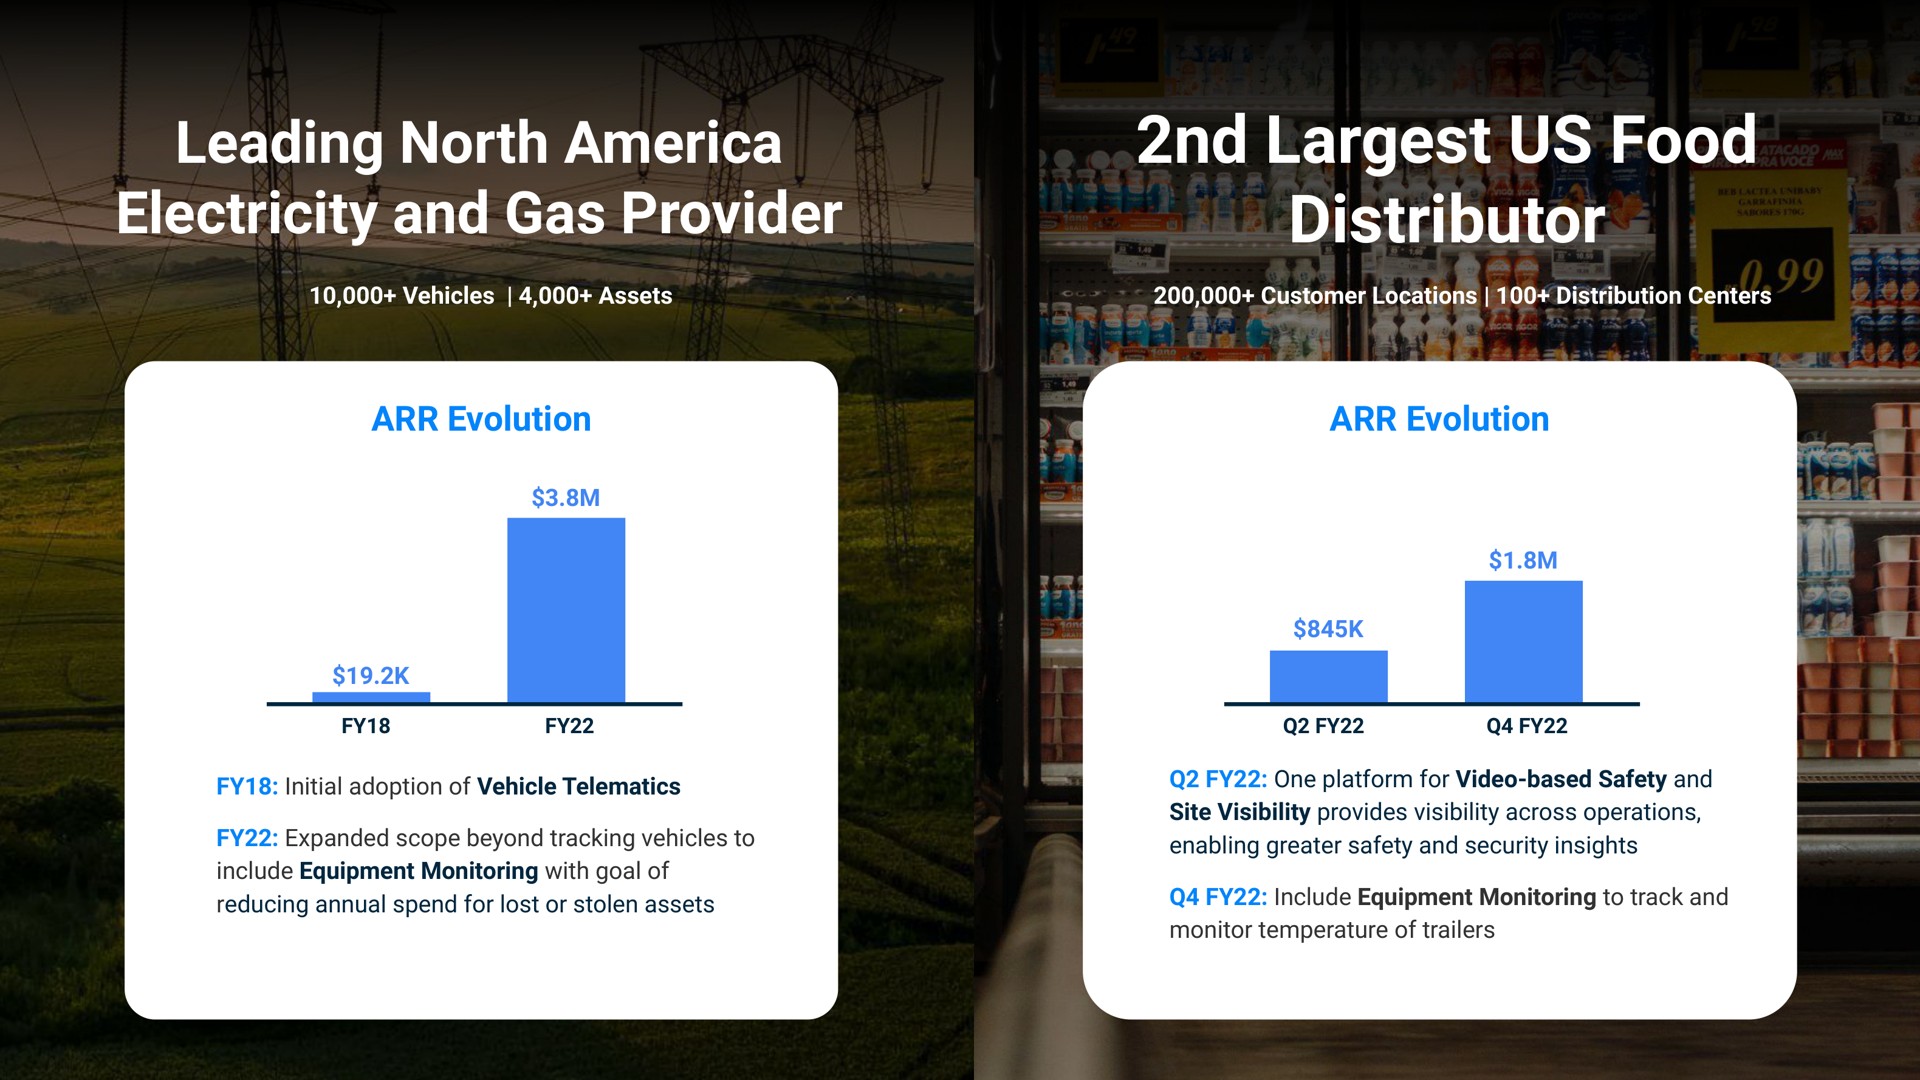 duke leading north electricity and gas provider us food distributor vehicles assets customer locations distribution centers evolution evolution initial adoption of vehicle expanded scope beyond tracking vehicles to include equipment monitoring with goal of reducing annual spend for lost or stolen assets one platform for video based safety and site visibility provides visibility across operations enabling greater safety and security insights include equipment monitoring to track and monitor temperature of trailers | Samsara